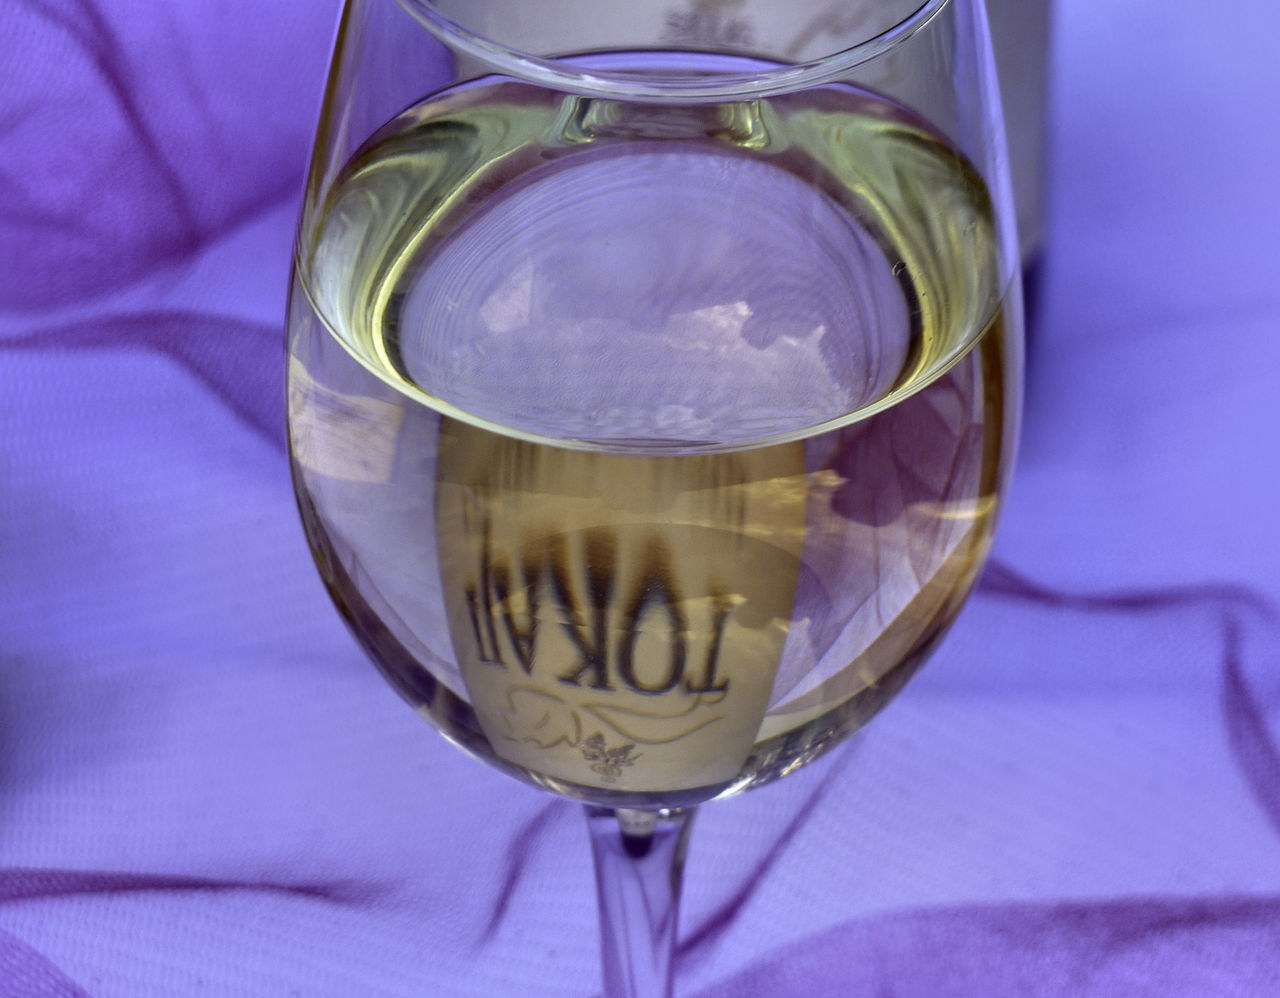 CLOSE-UP OF GLASS OF WINE ON TABLE